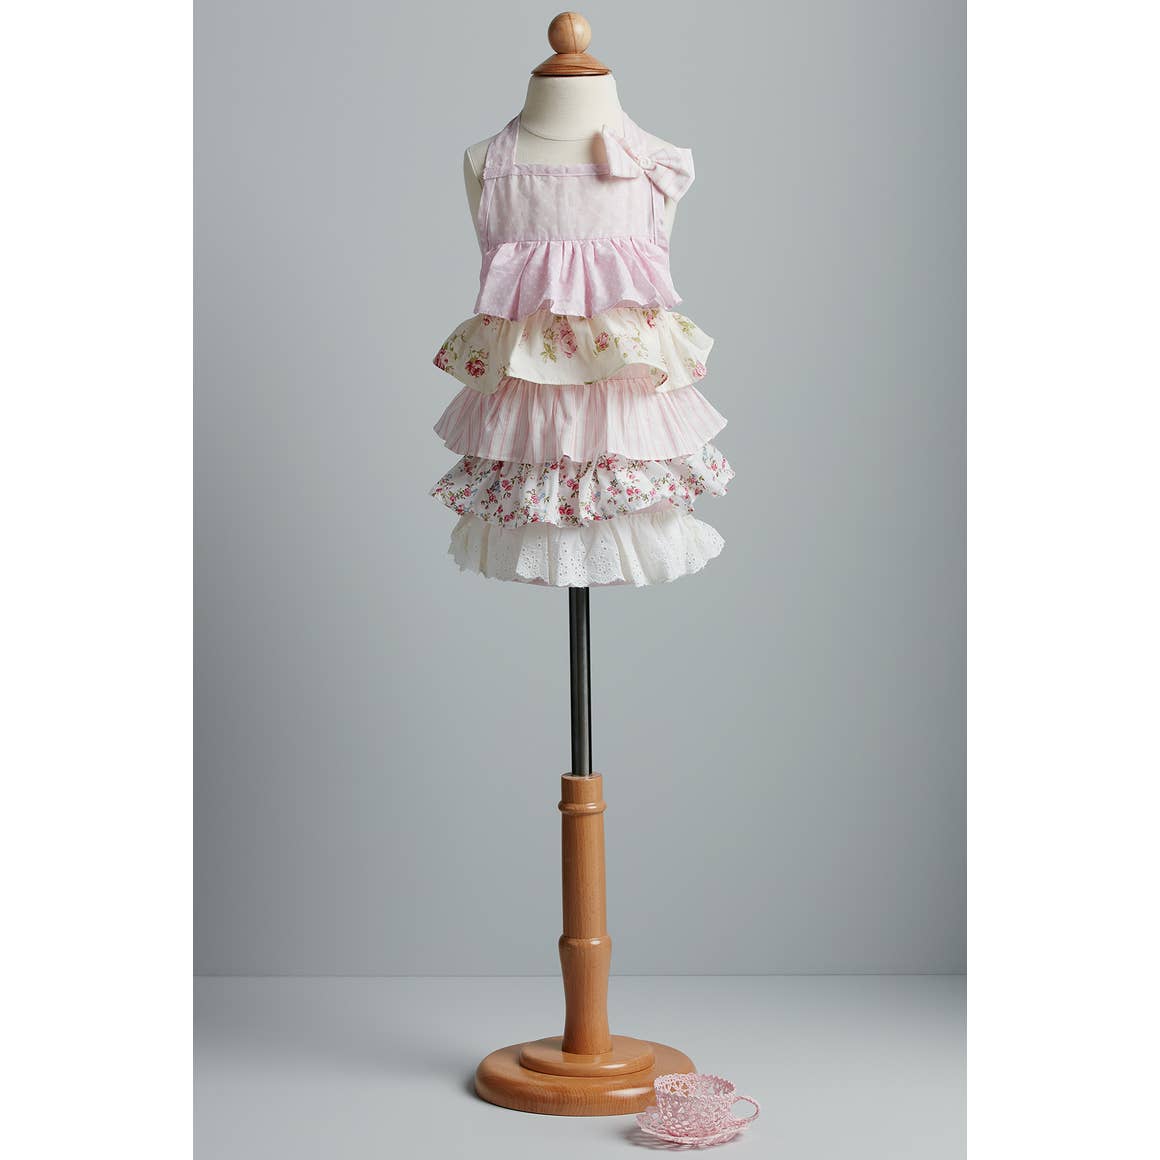 Children's Floral Pink and White Apron